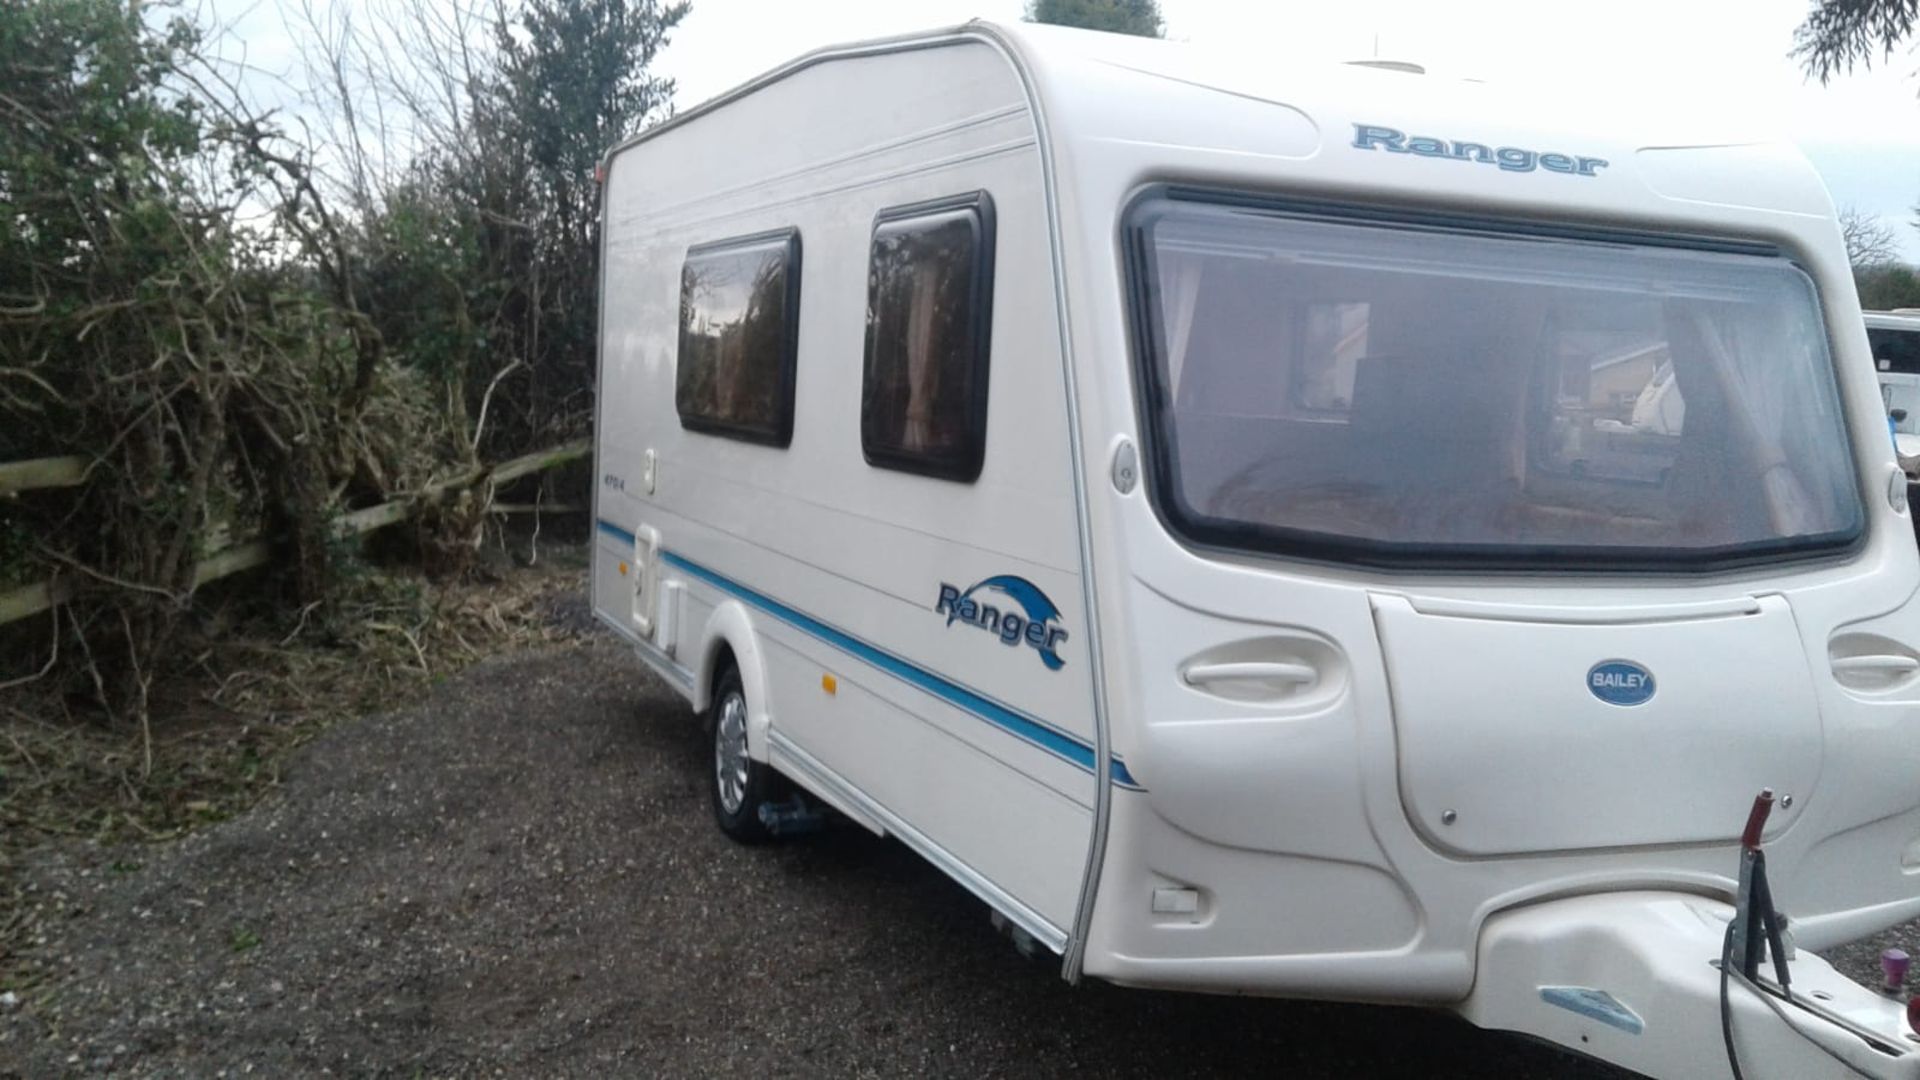 BAILEY RANGER 470/4 SINGLE AXLE 4 BERTH CARAVAN, CLEAN THROUGHOUT C/W FULL-SIZE AWNING *NO VAT* - Image 3 of 20